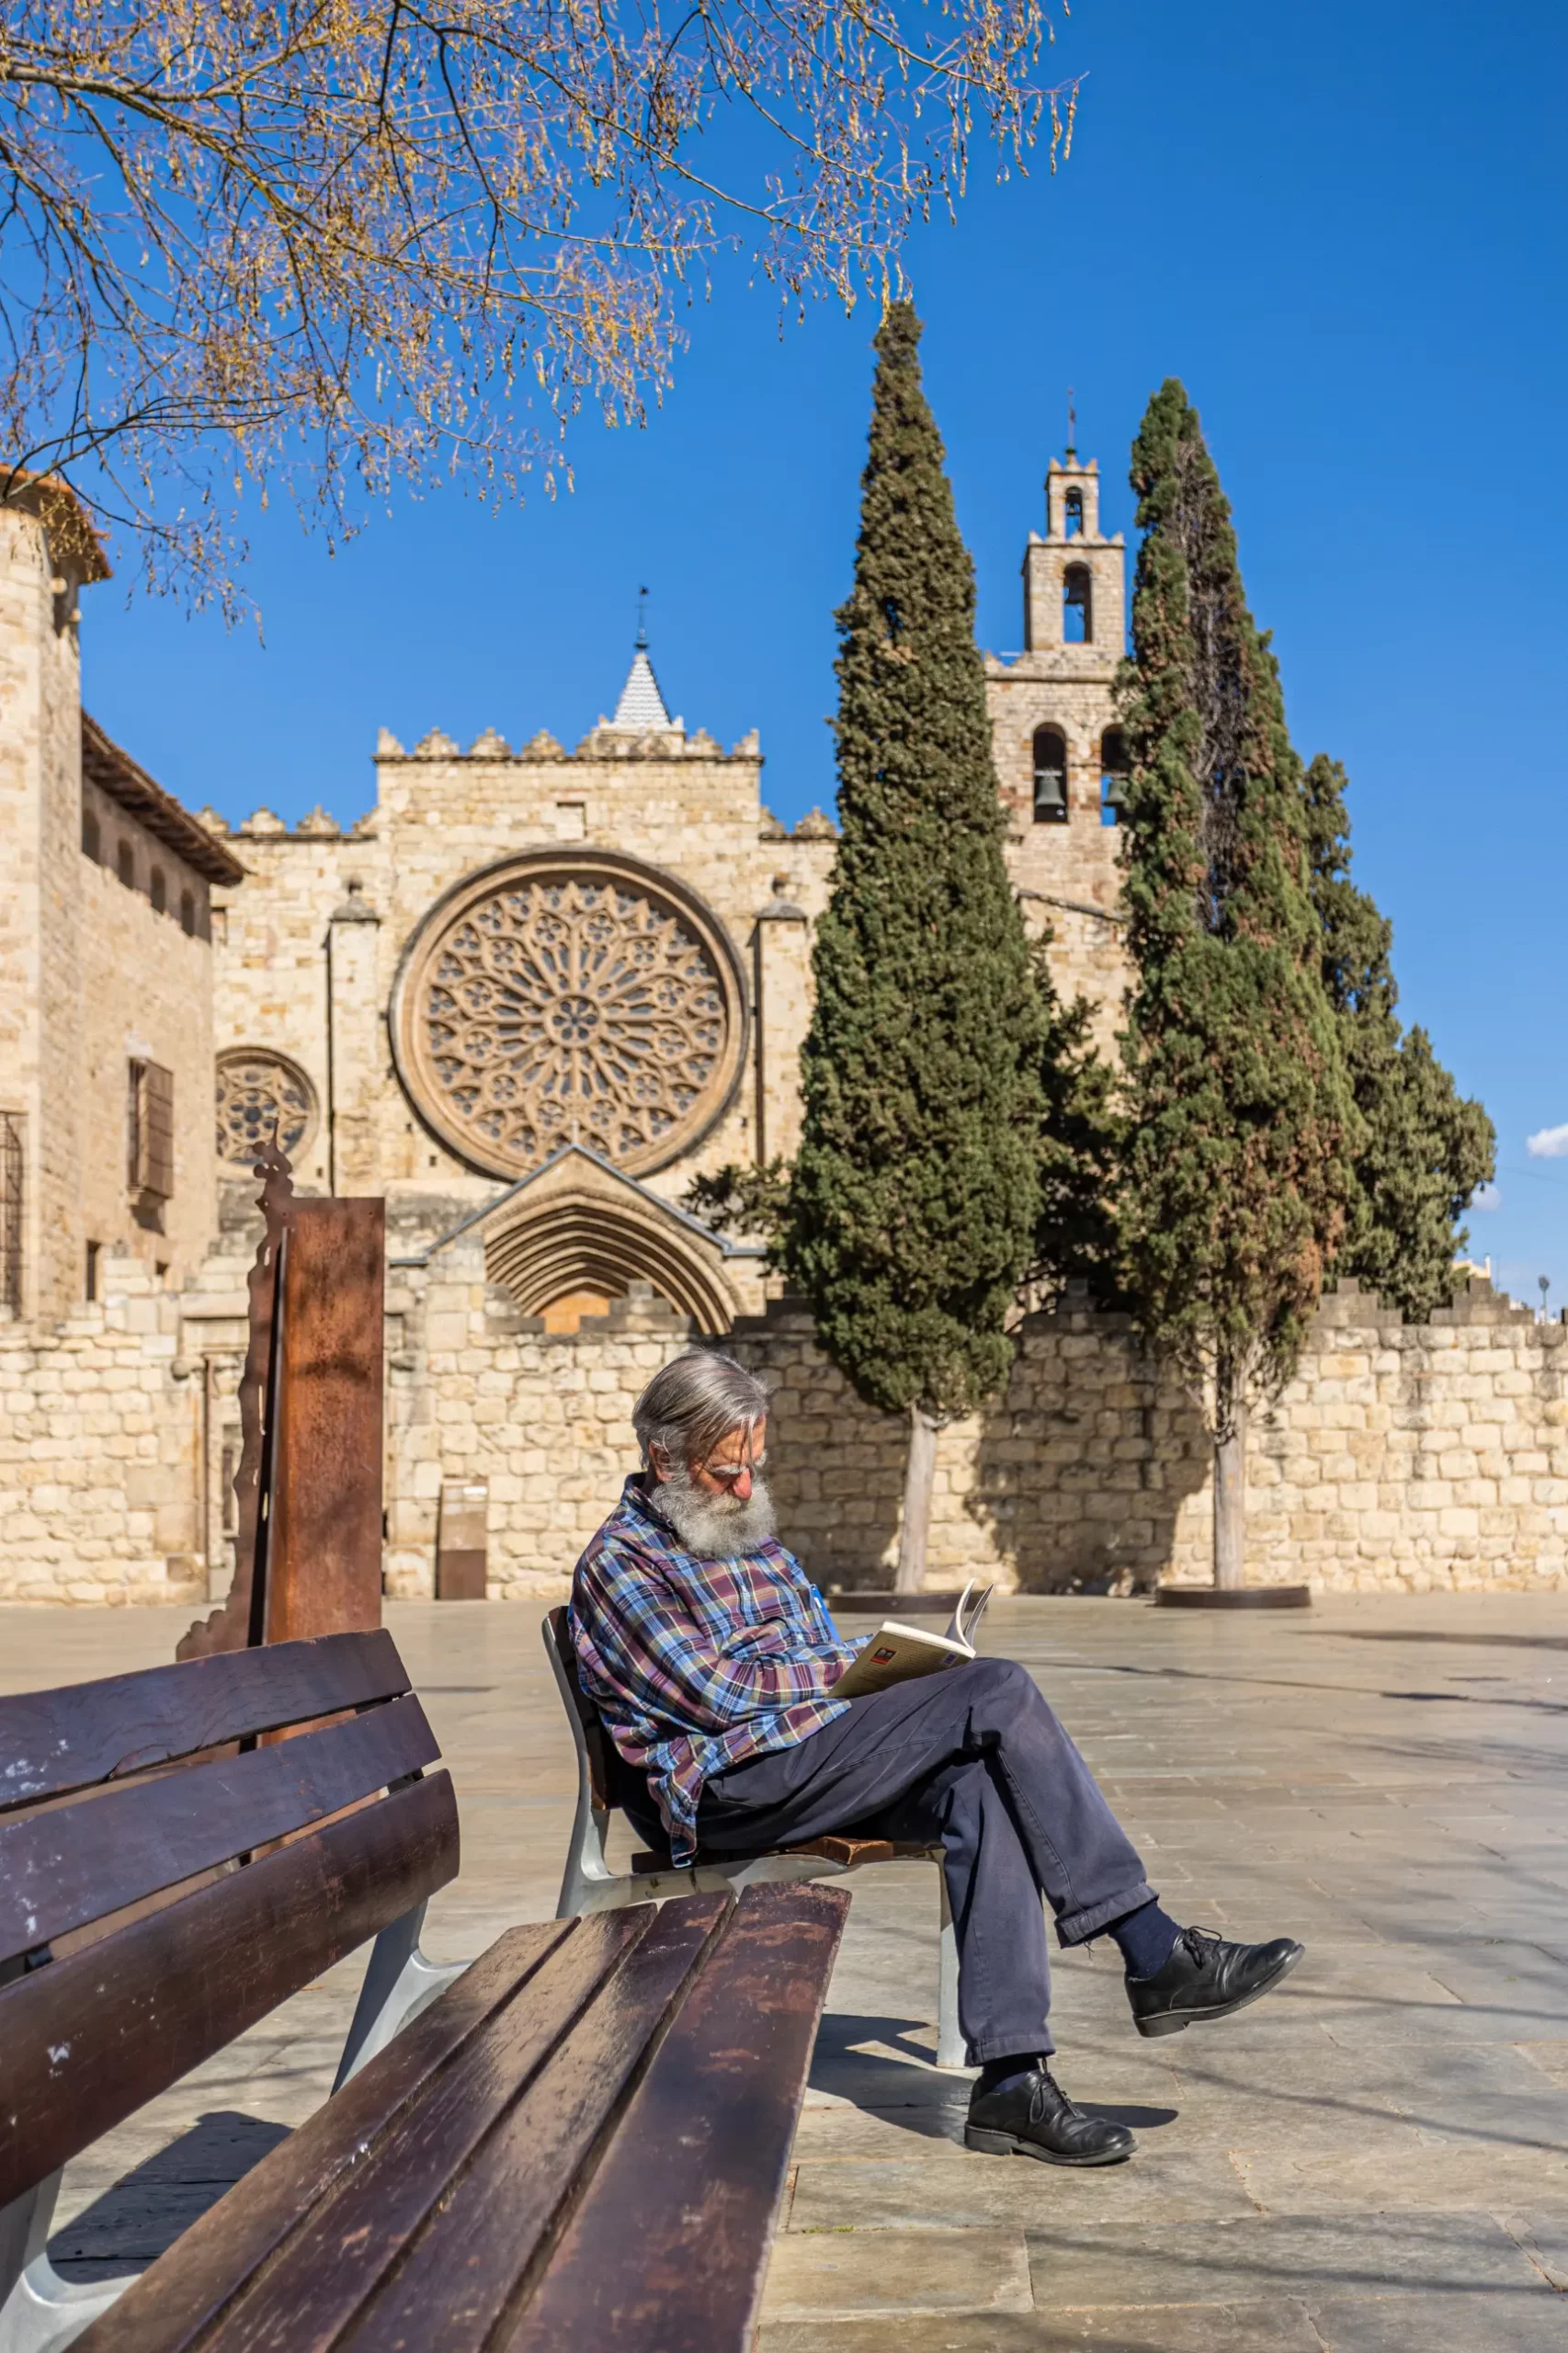 A Sant Cugat citizen reading a book in the morning with the iconic Iglesia del Monasterio behind